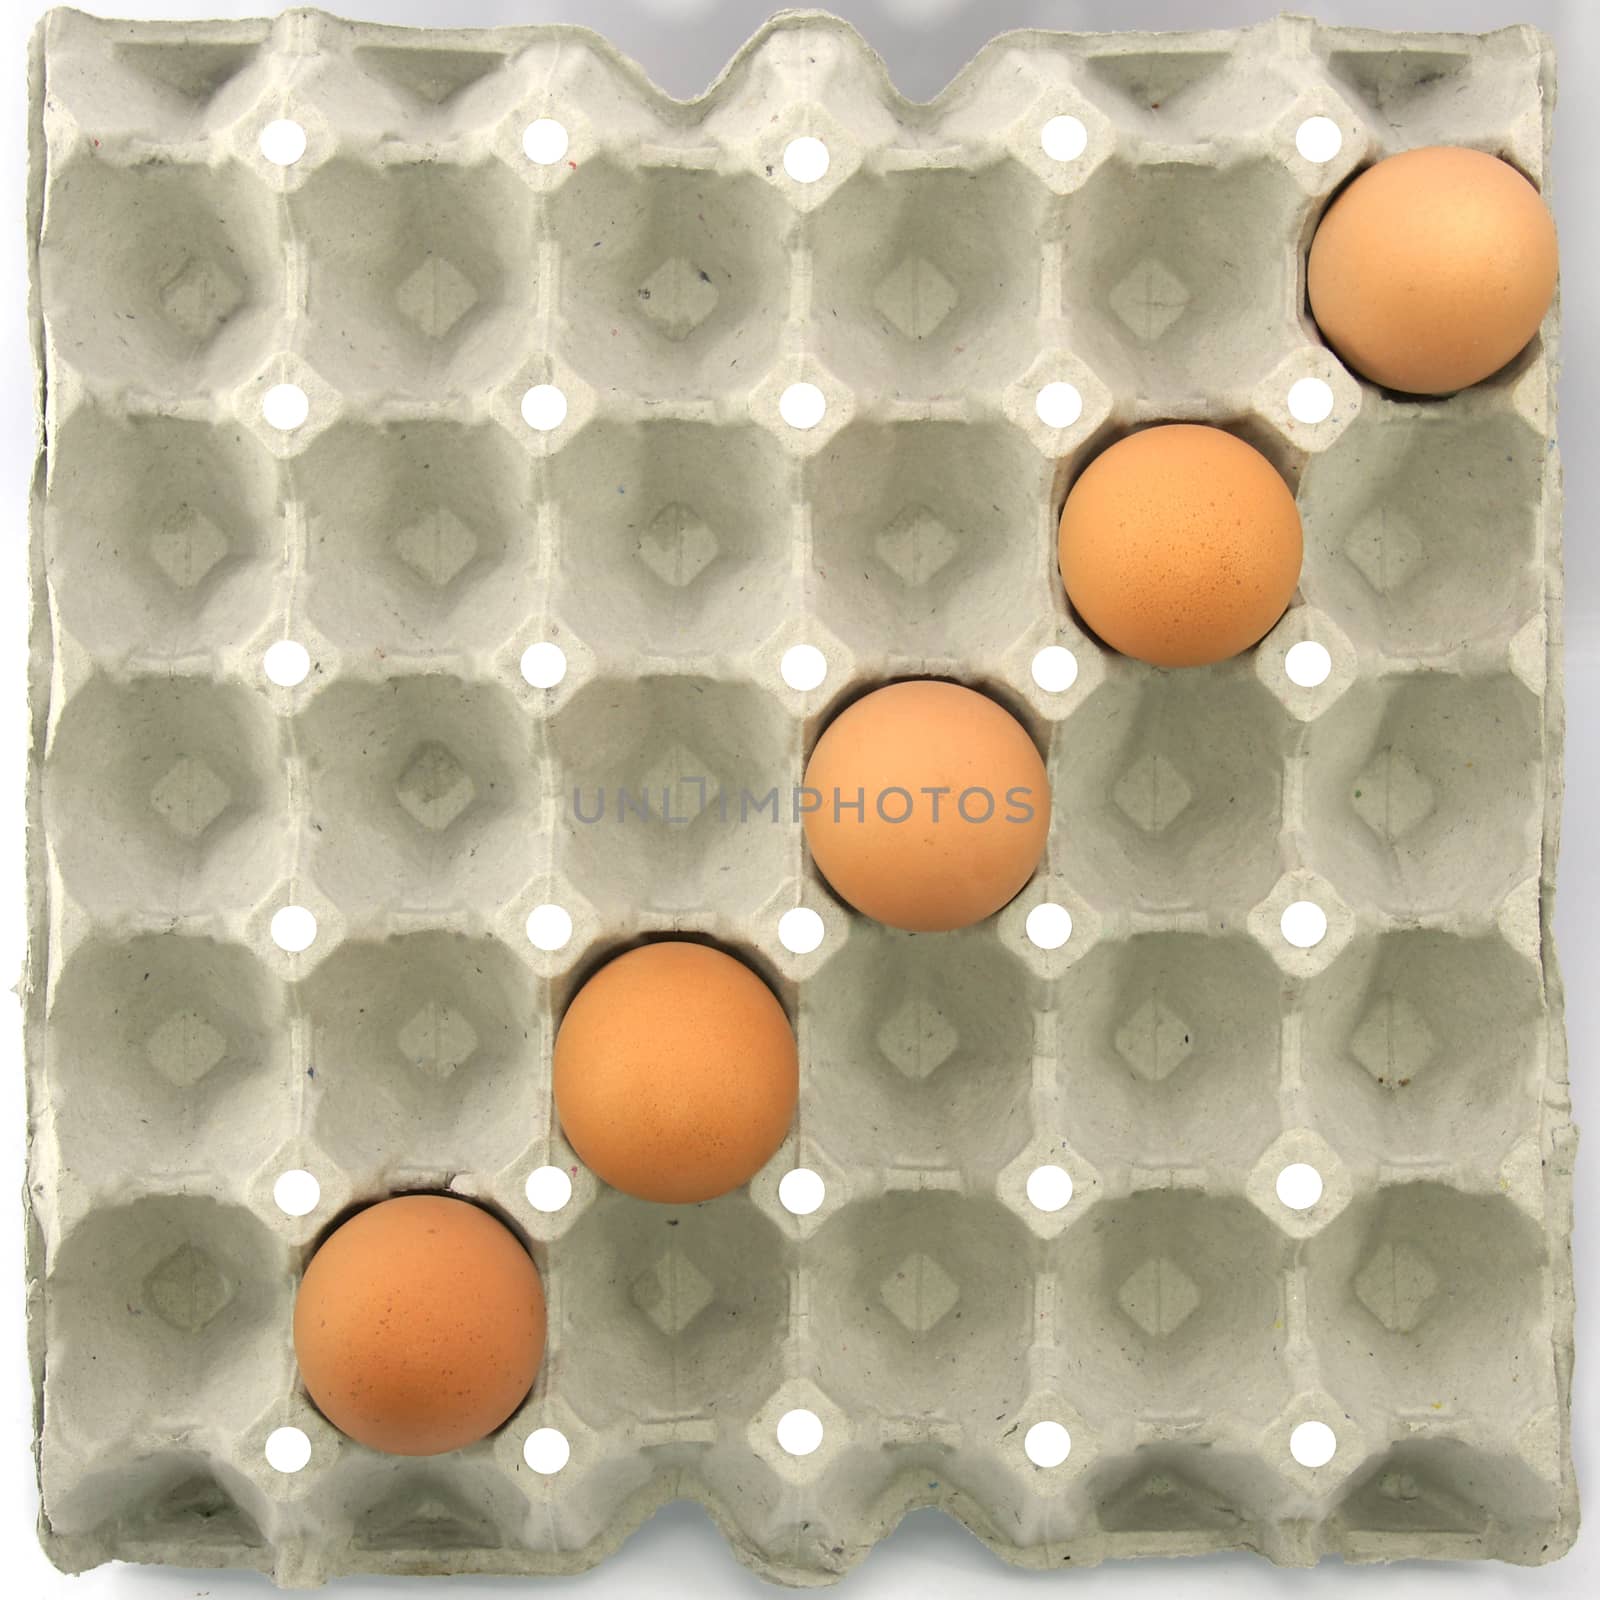 Divide symbol show by eggs in paper tray